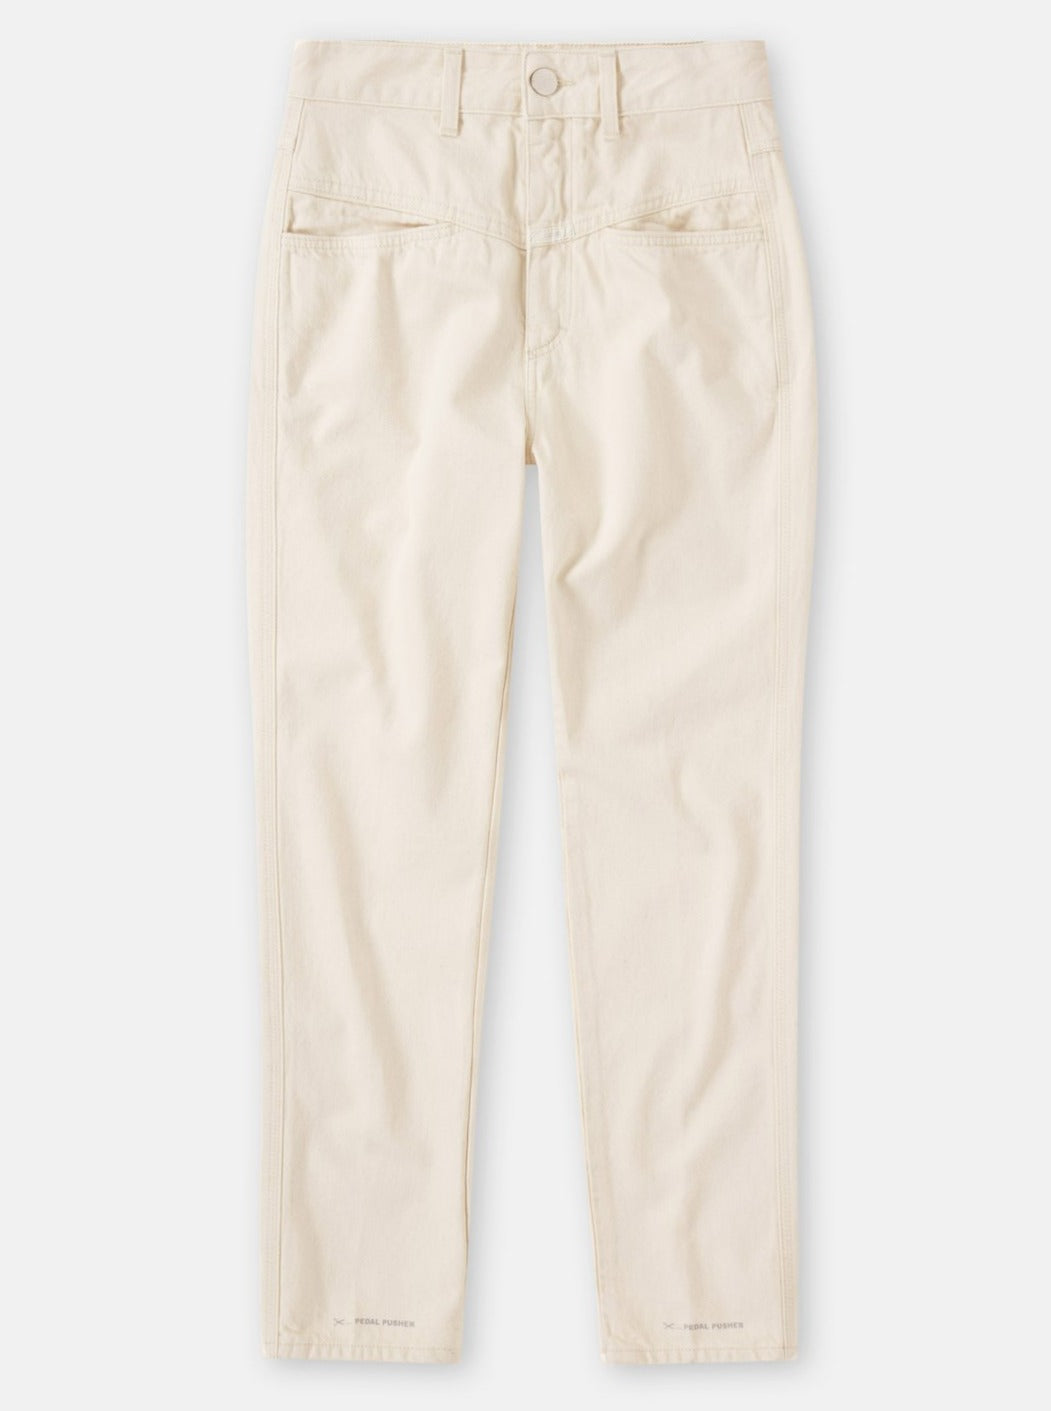 PEDAL PUSHER JEANS | IVORY CLOSED